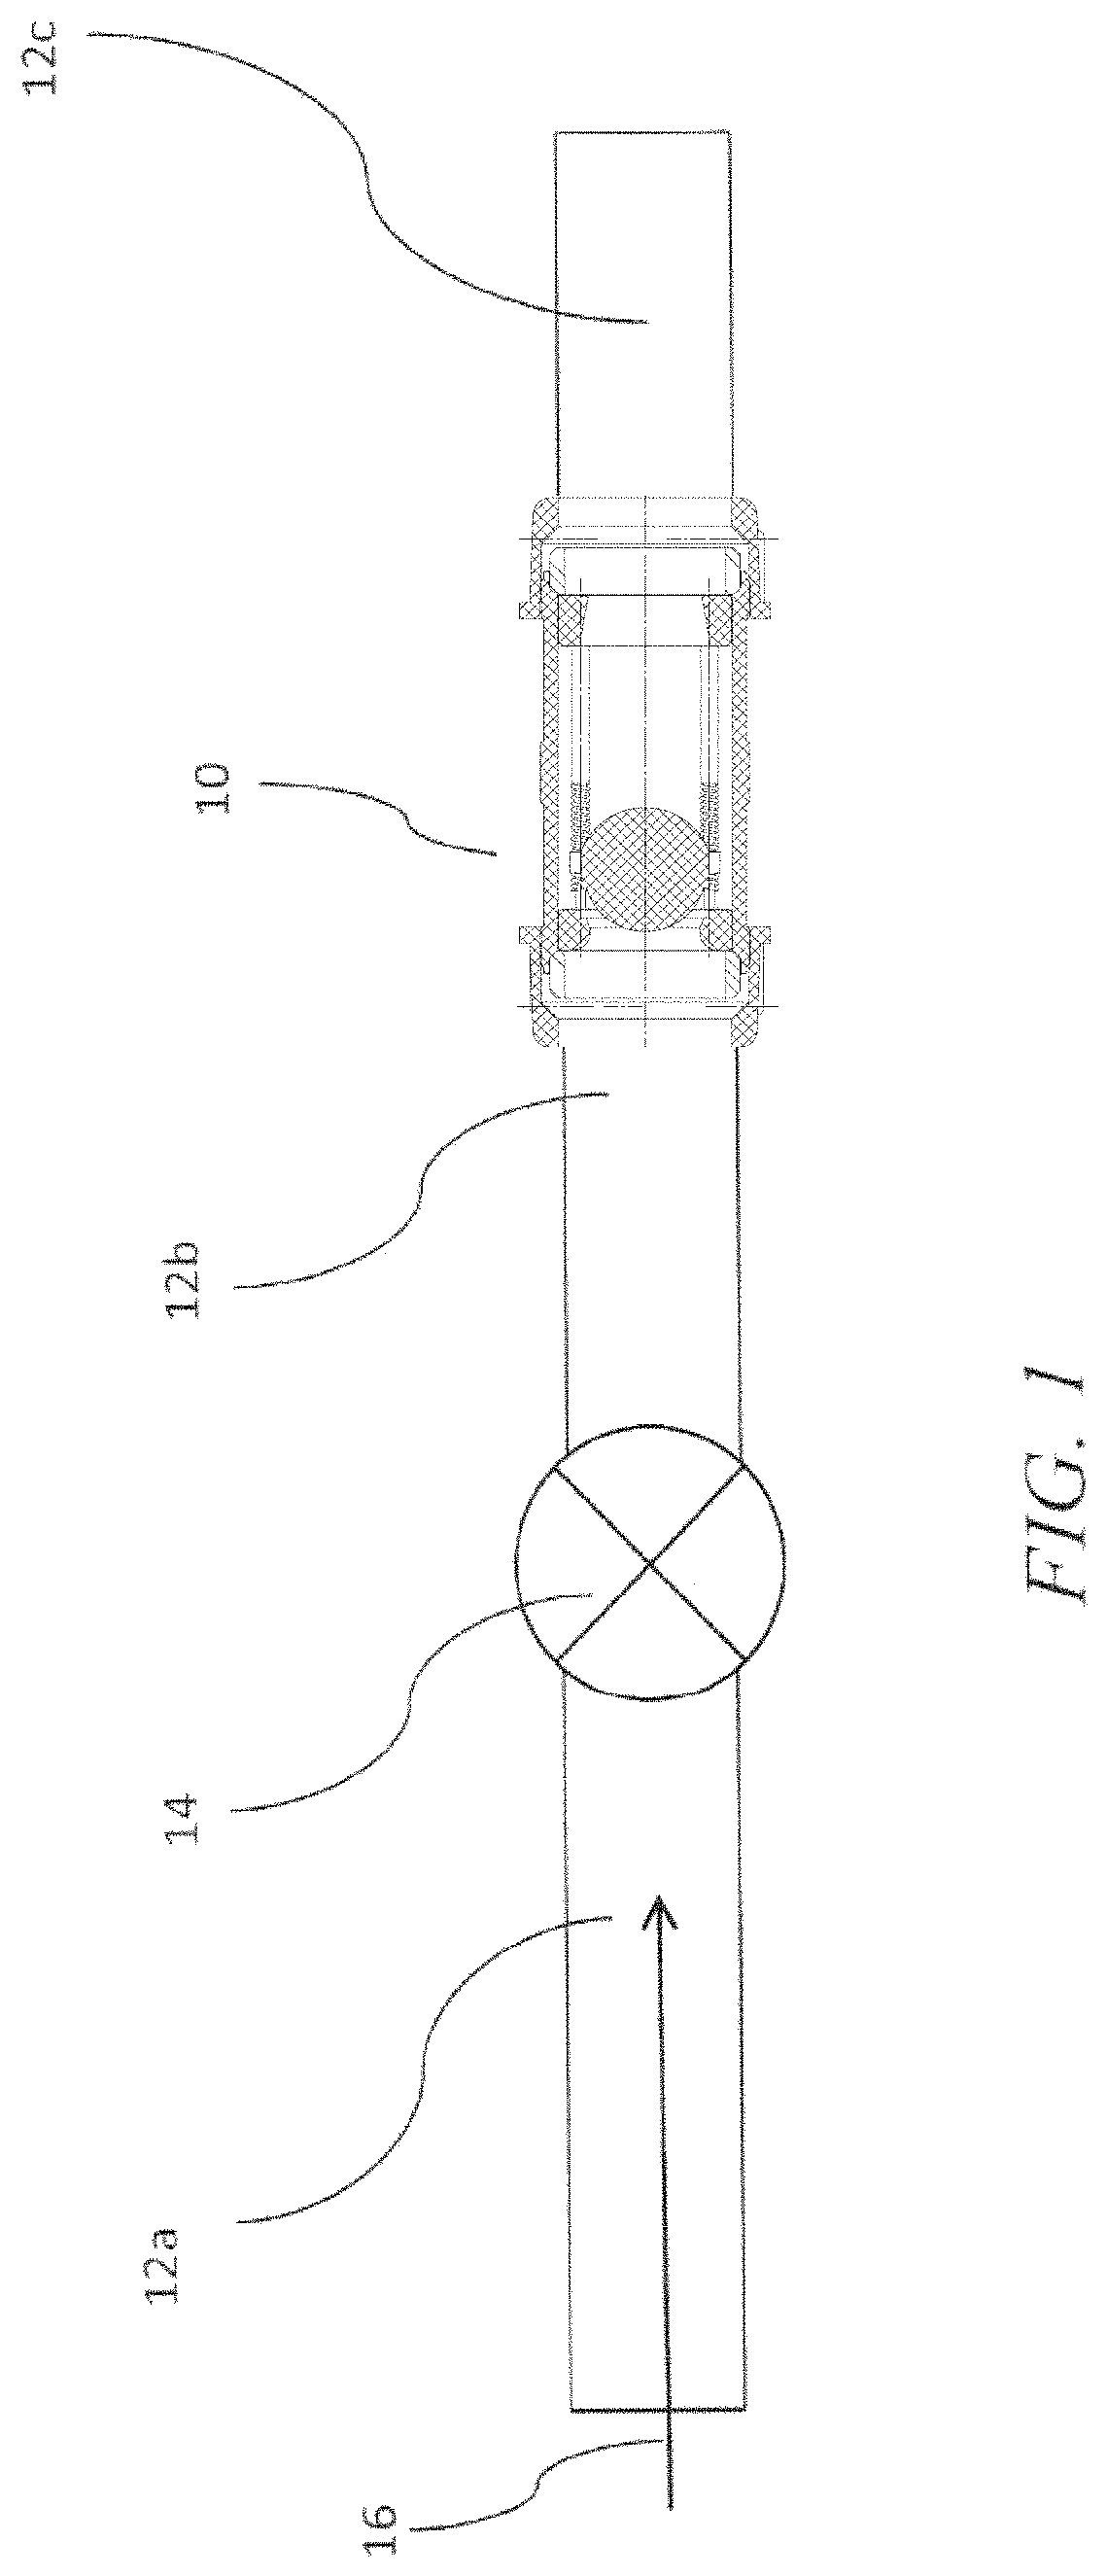 Apparatus, systems and methods for managing fluids comprising a poppet valve having multiple springs